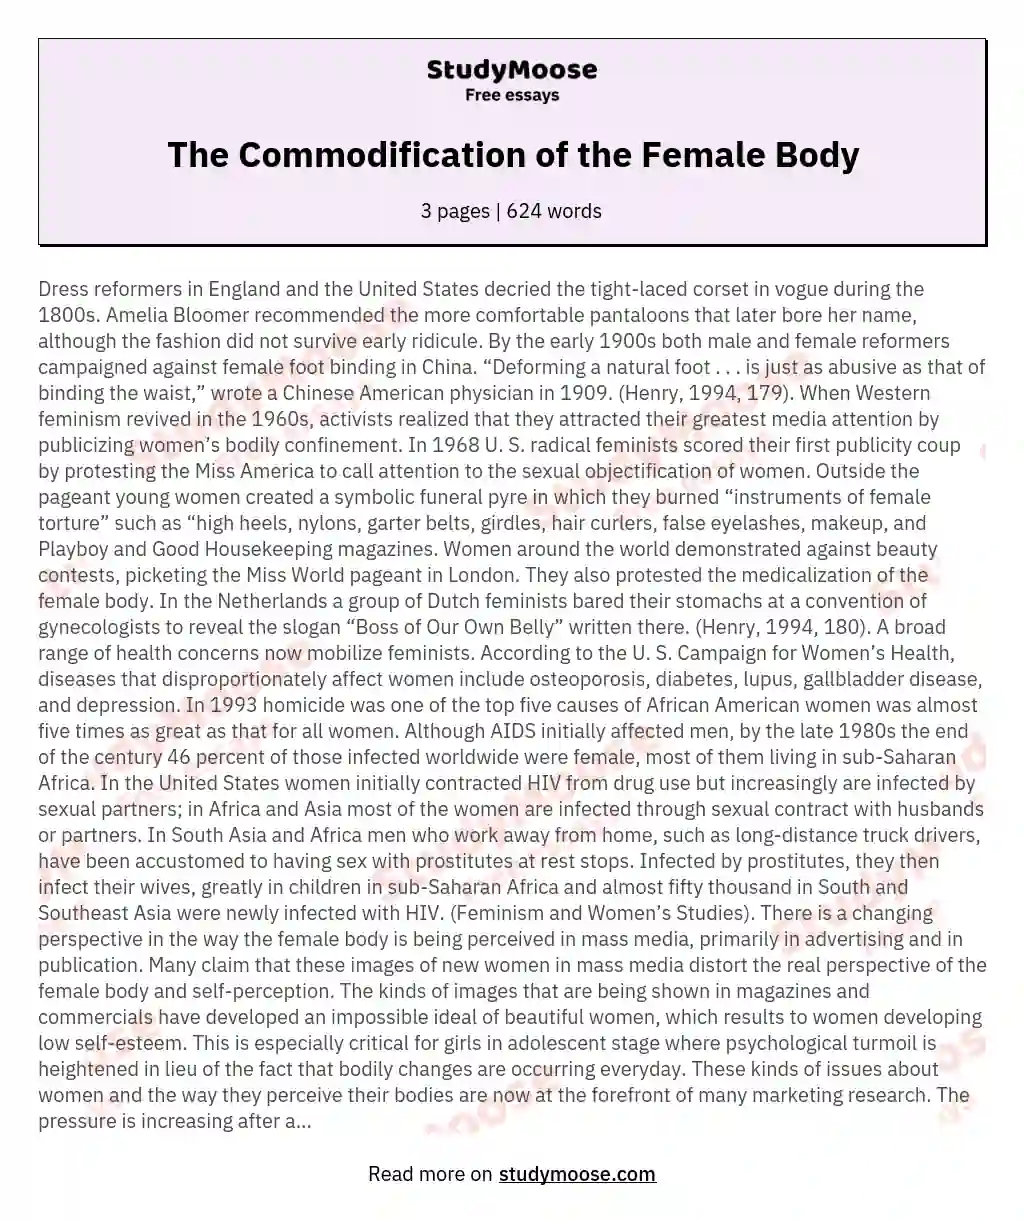 The Commodification of the Female Body essay